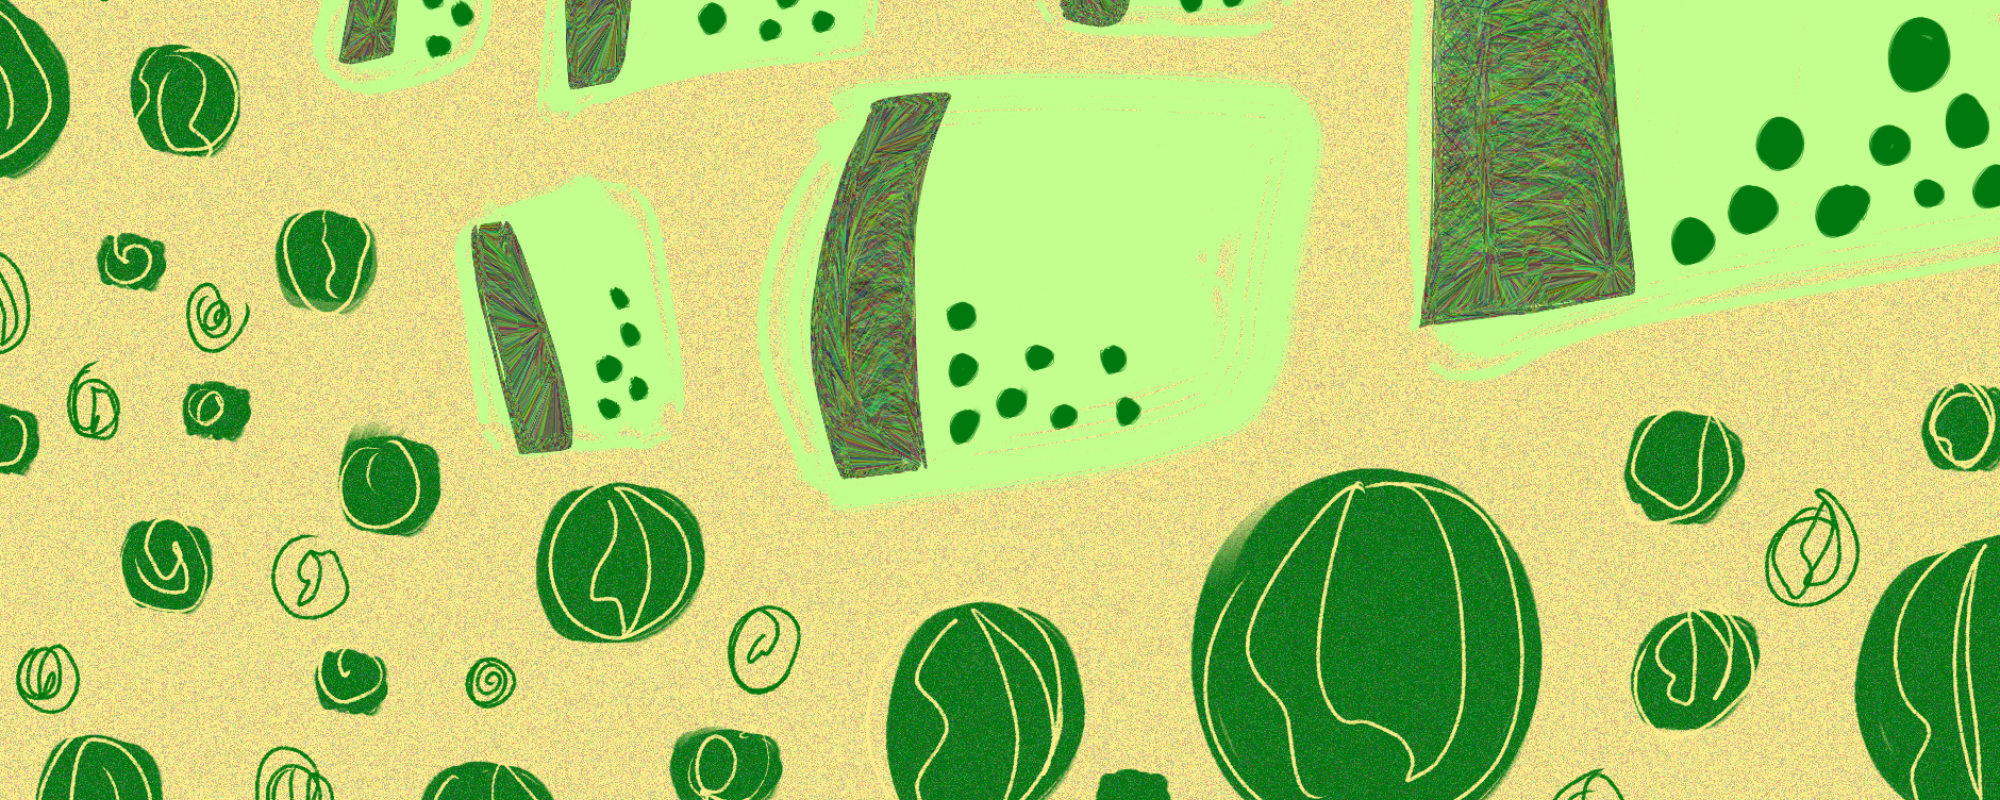 light green dotted jargon their sides, green spheres spilling out in bulk